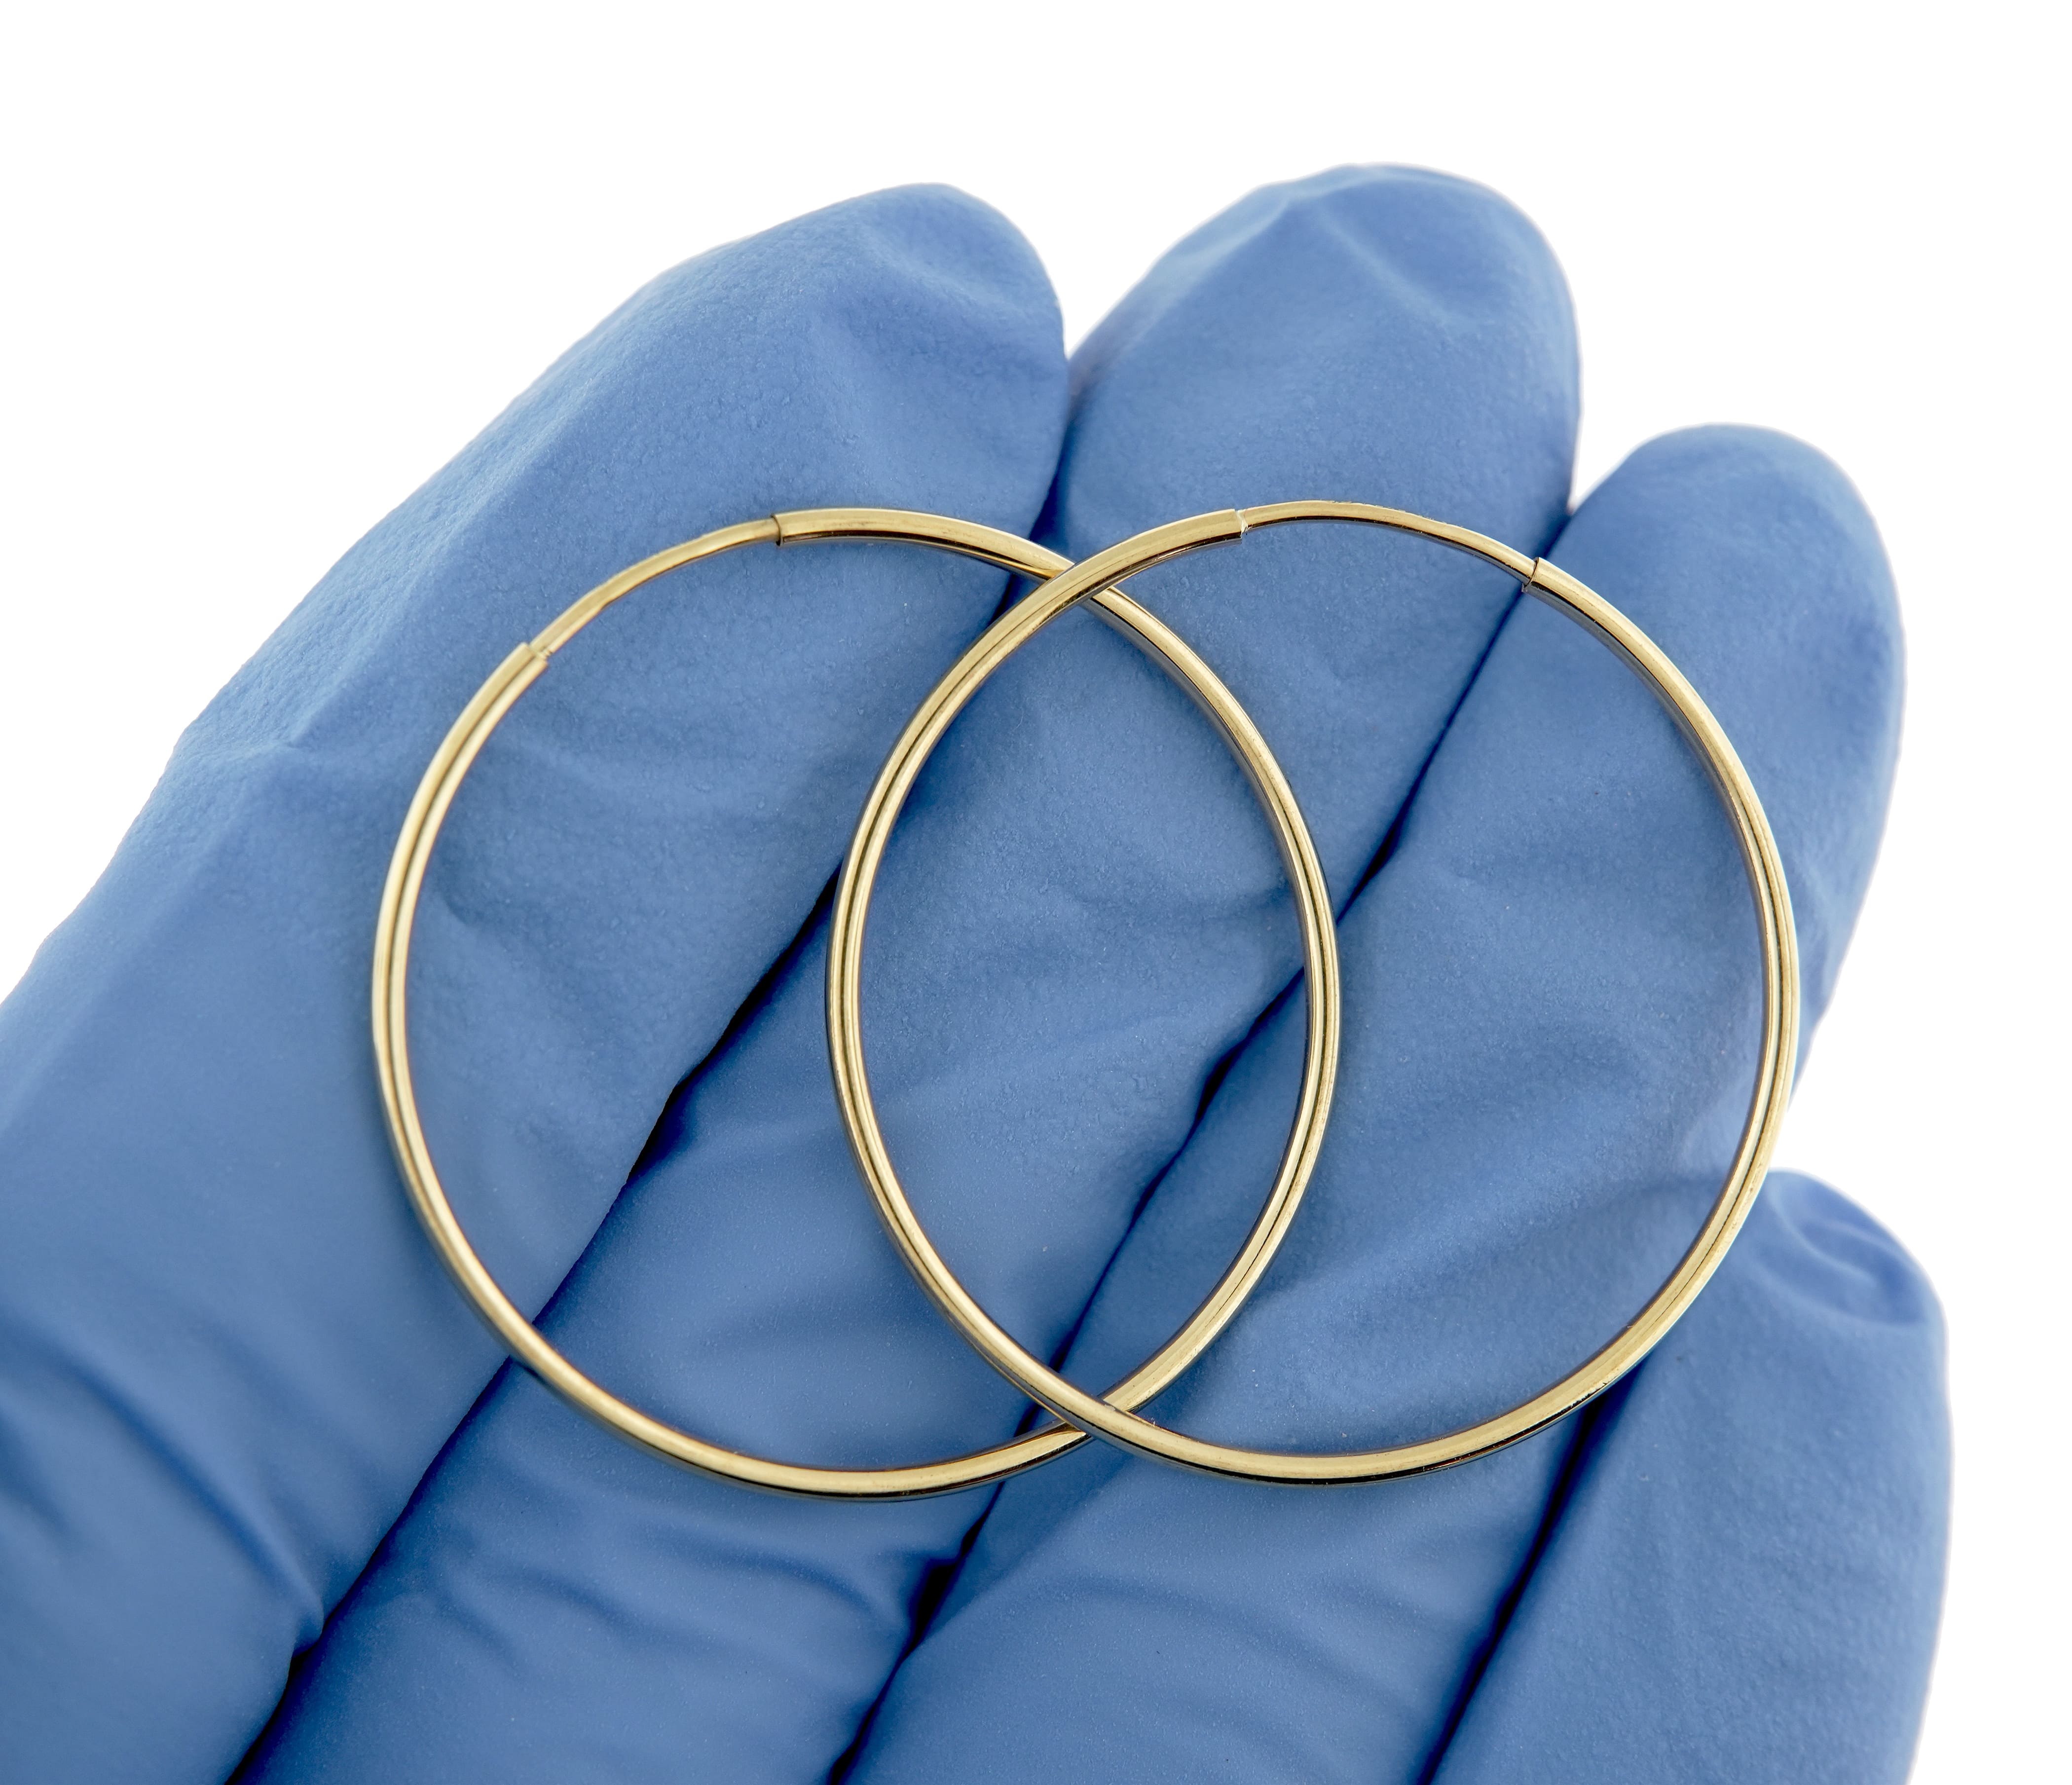 14K Yellow Gold 27mm x 1.25mm Round Endless Hoop Earrings